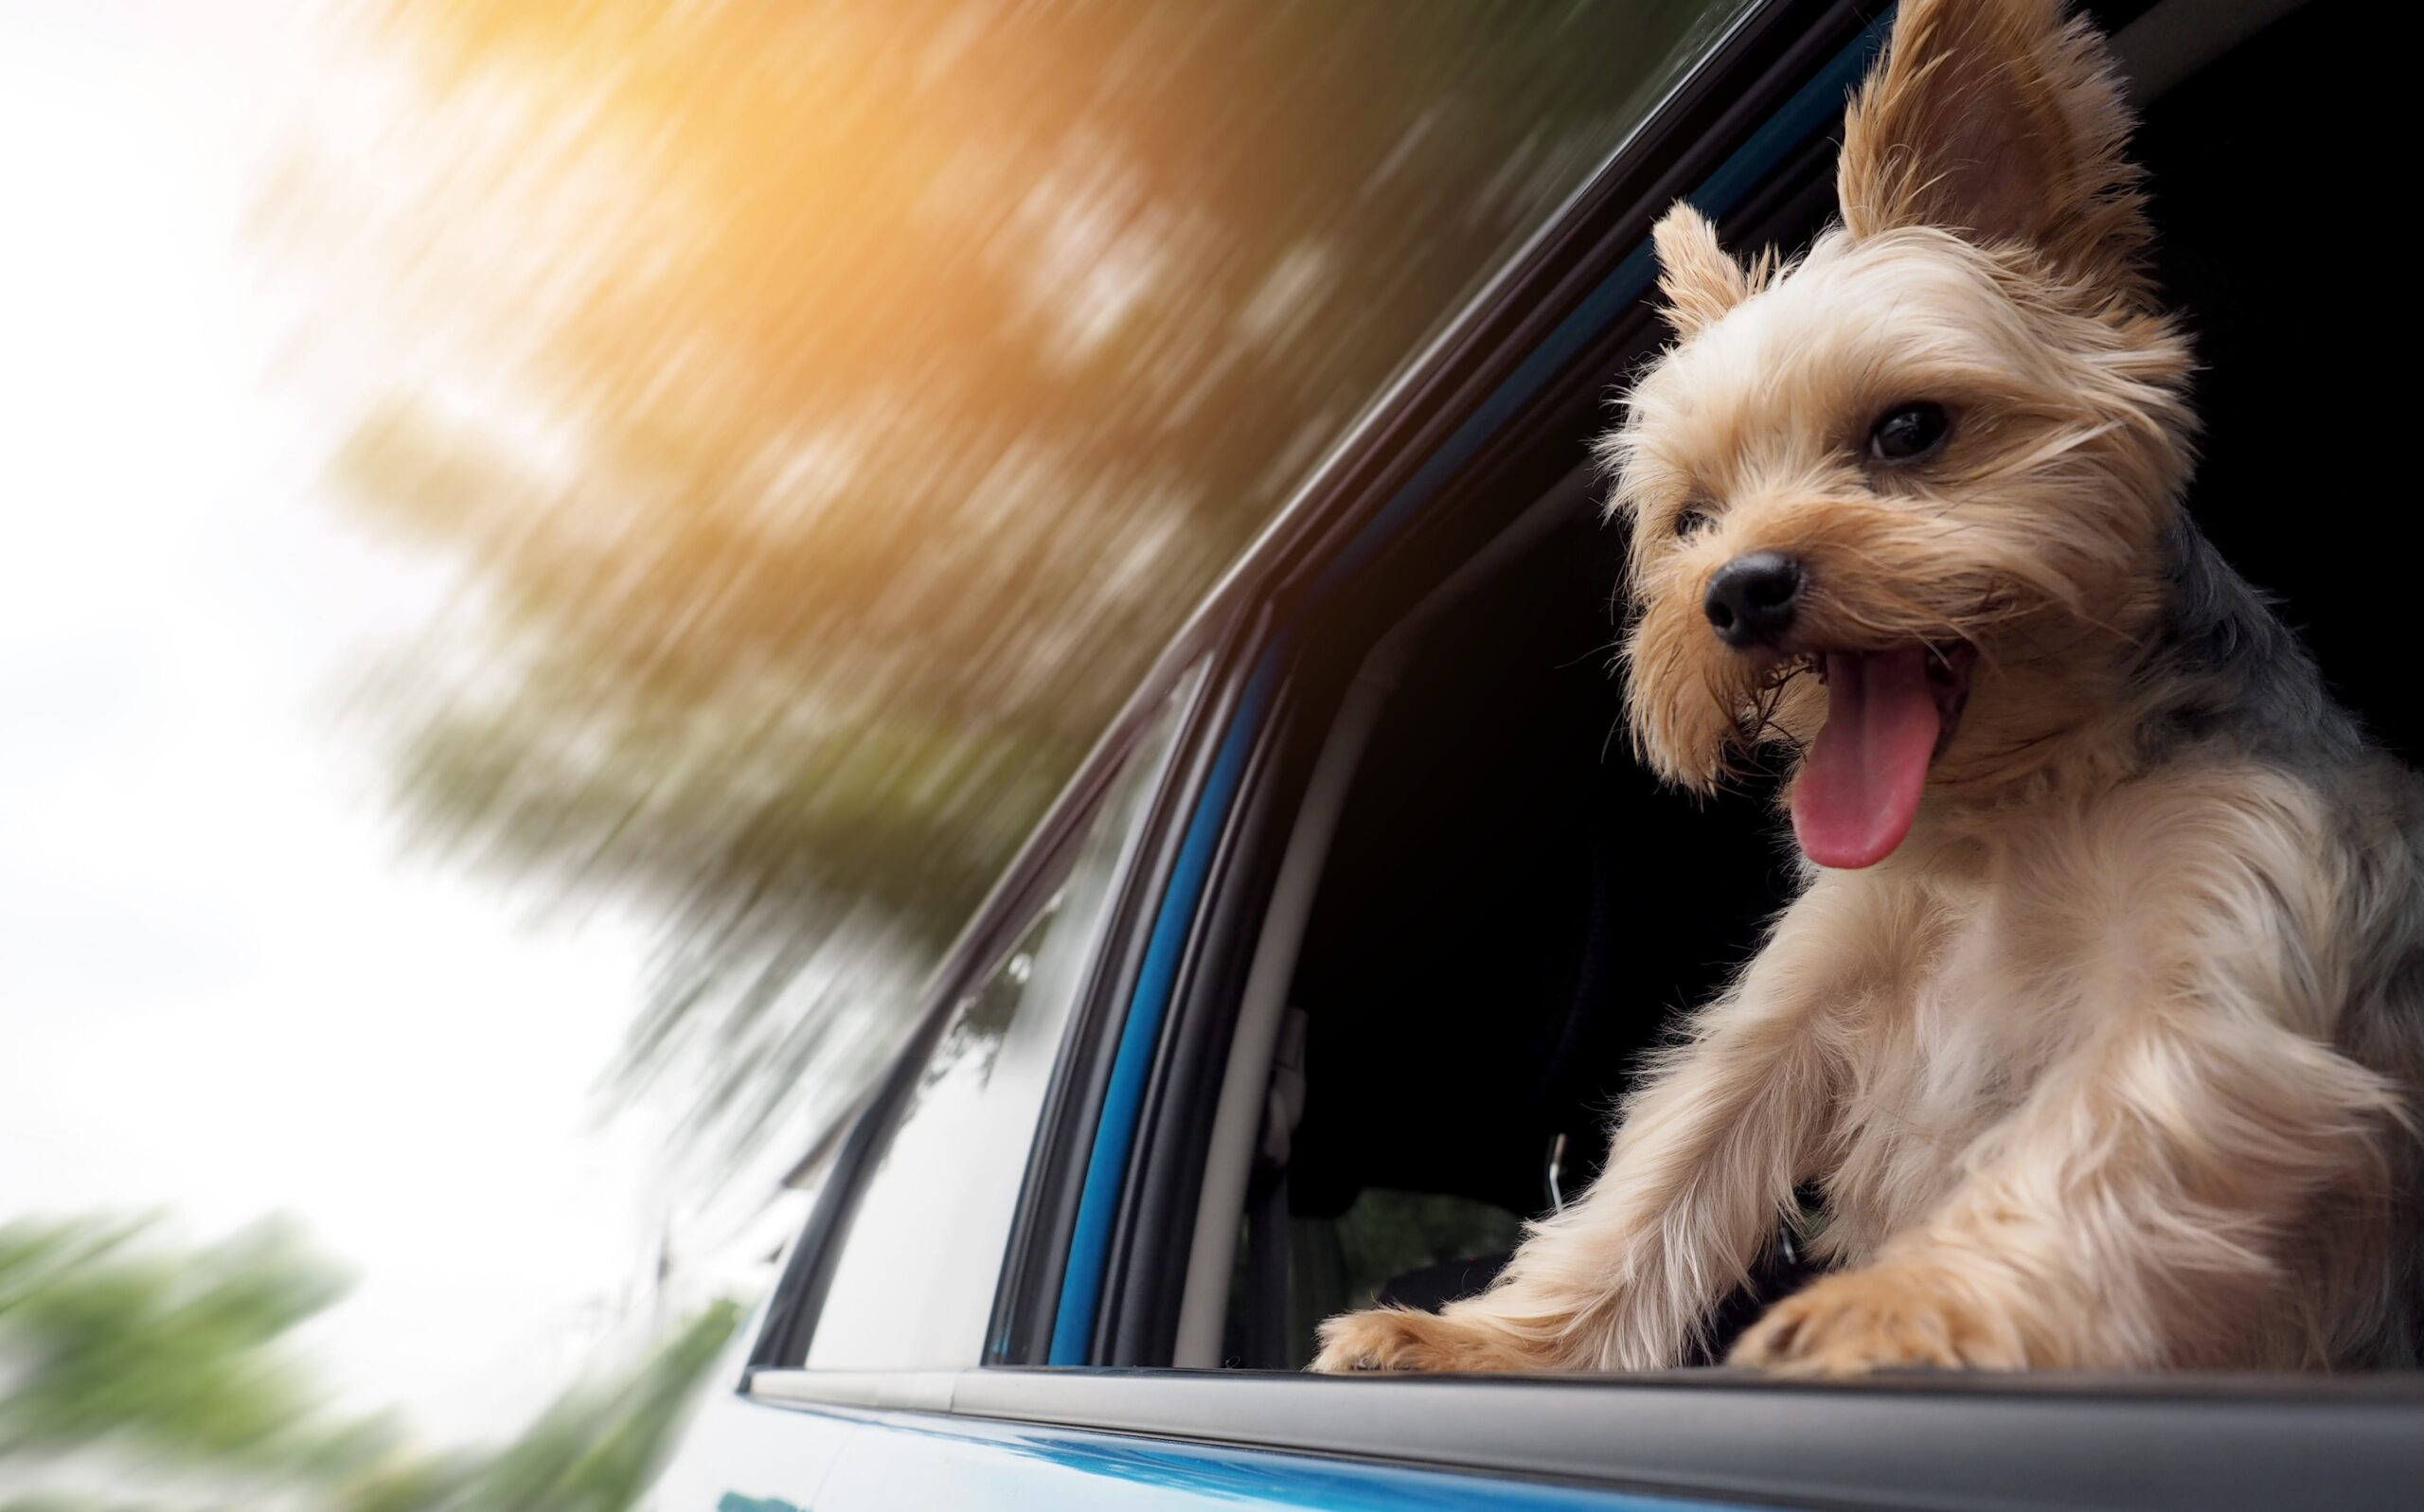 Safety Considerations for Driving with Pets